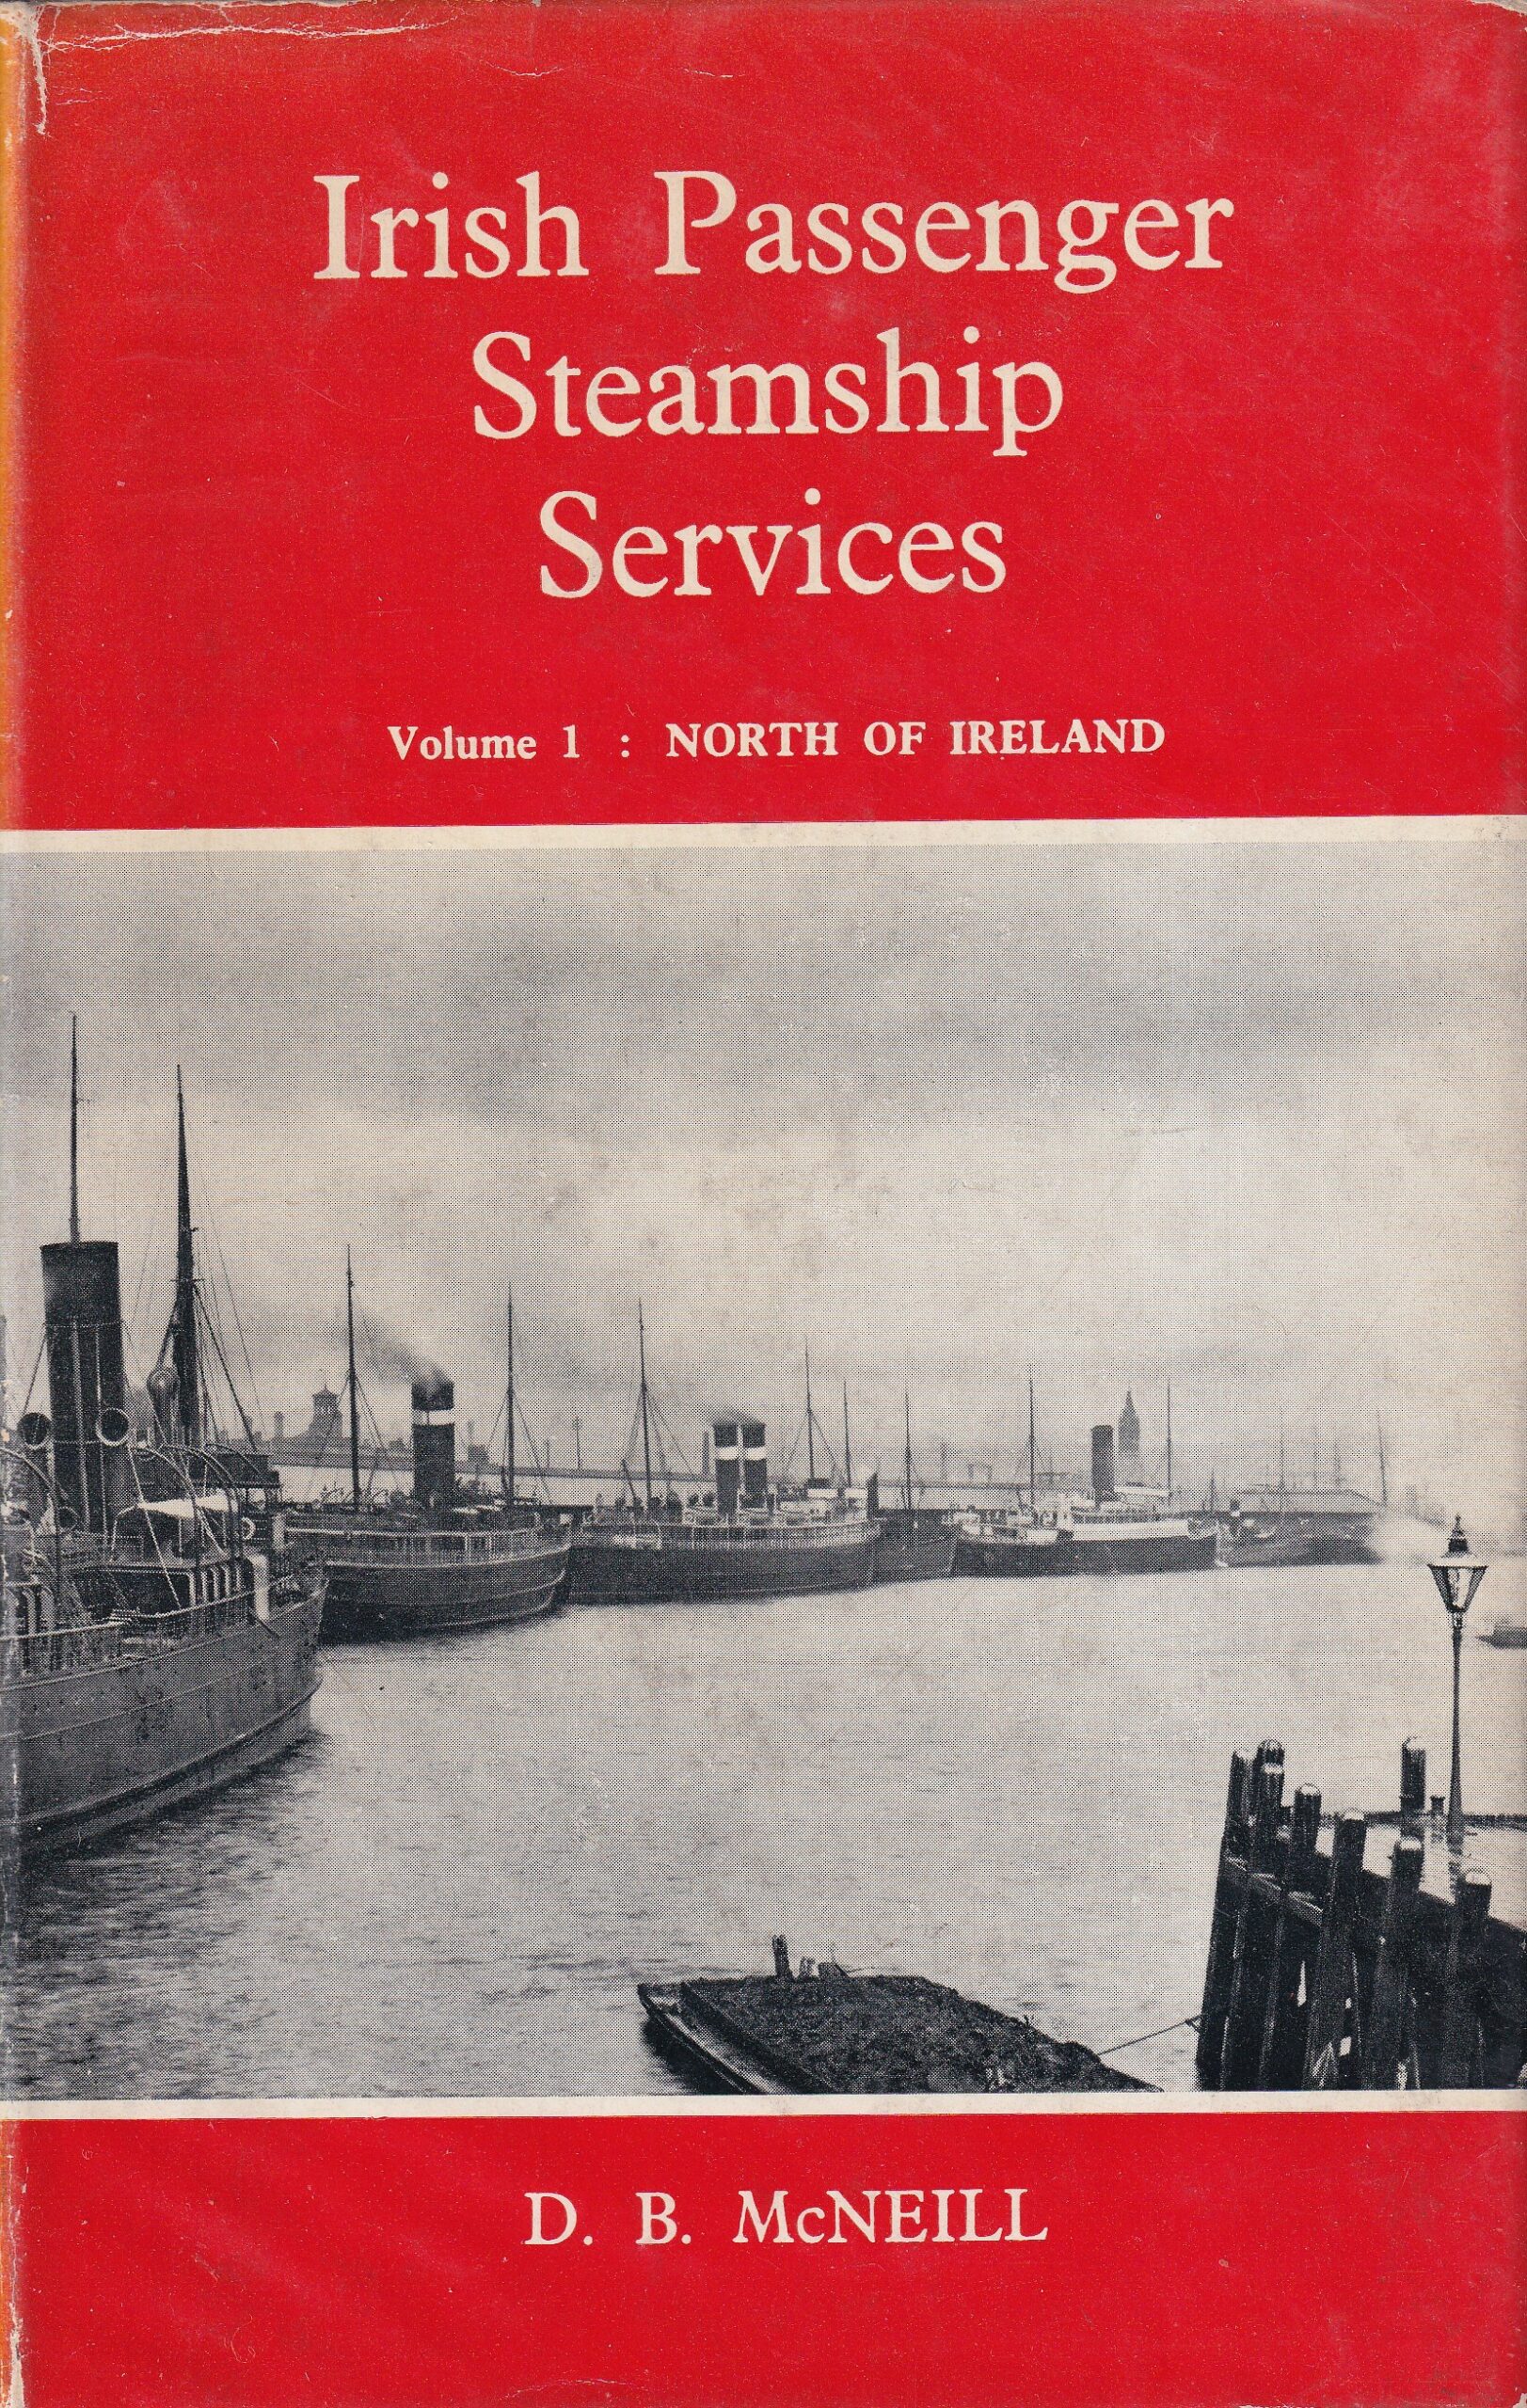 Irish Passenger Steamship Services (Volume One: North of Ireland and Volume Two: South of Ireland) | D.B. McNeill | Charlie Byrne's